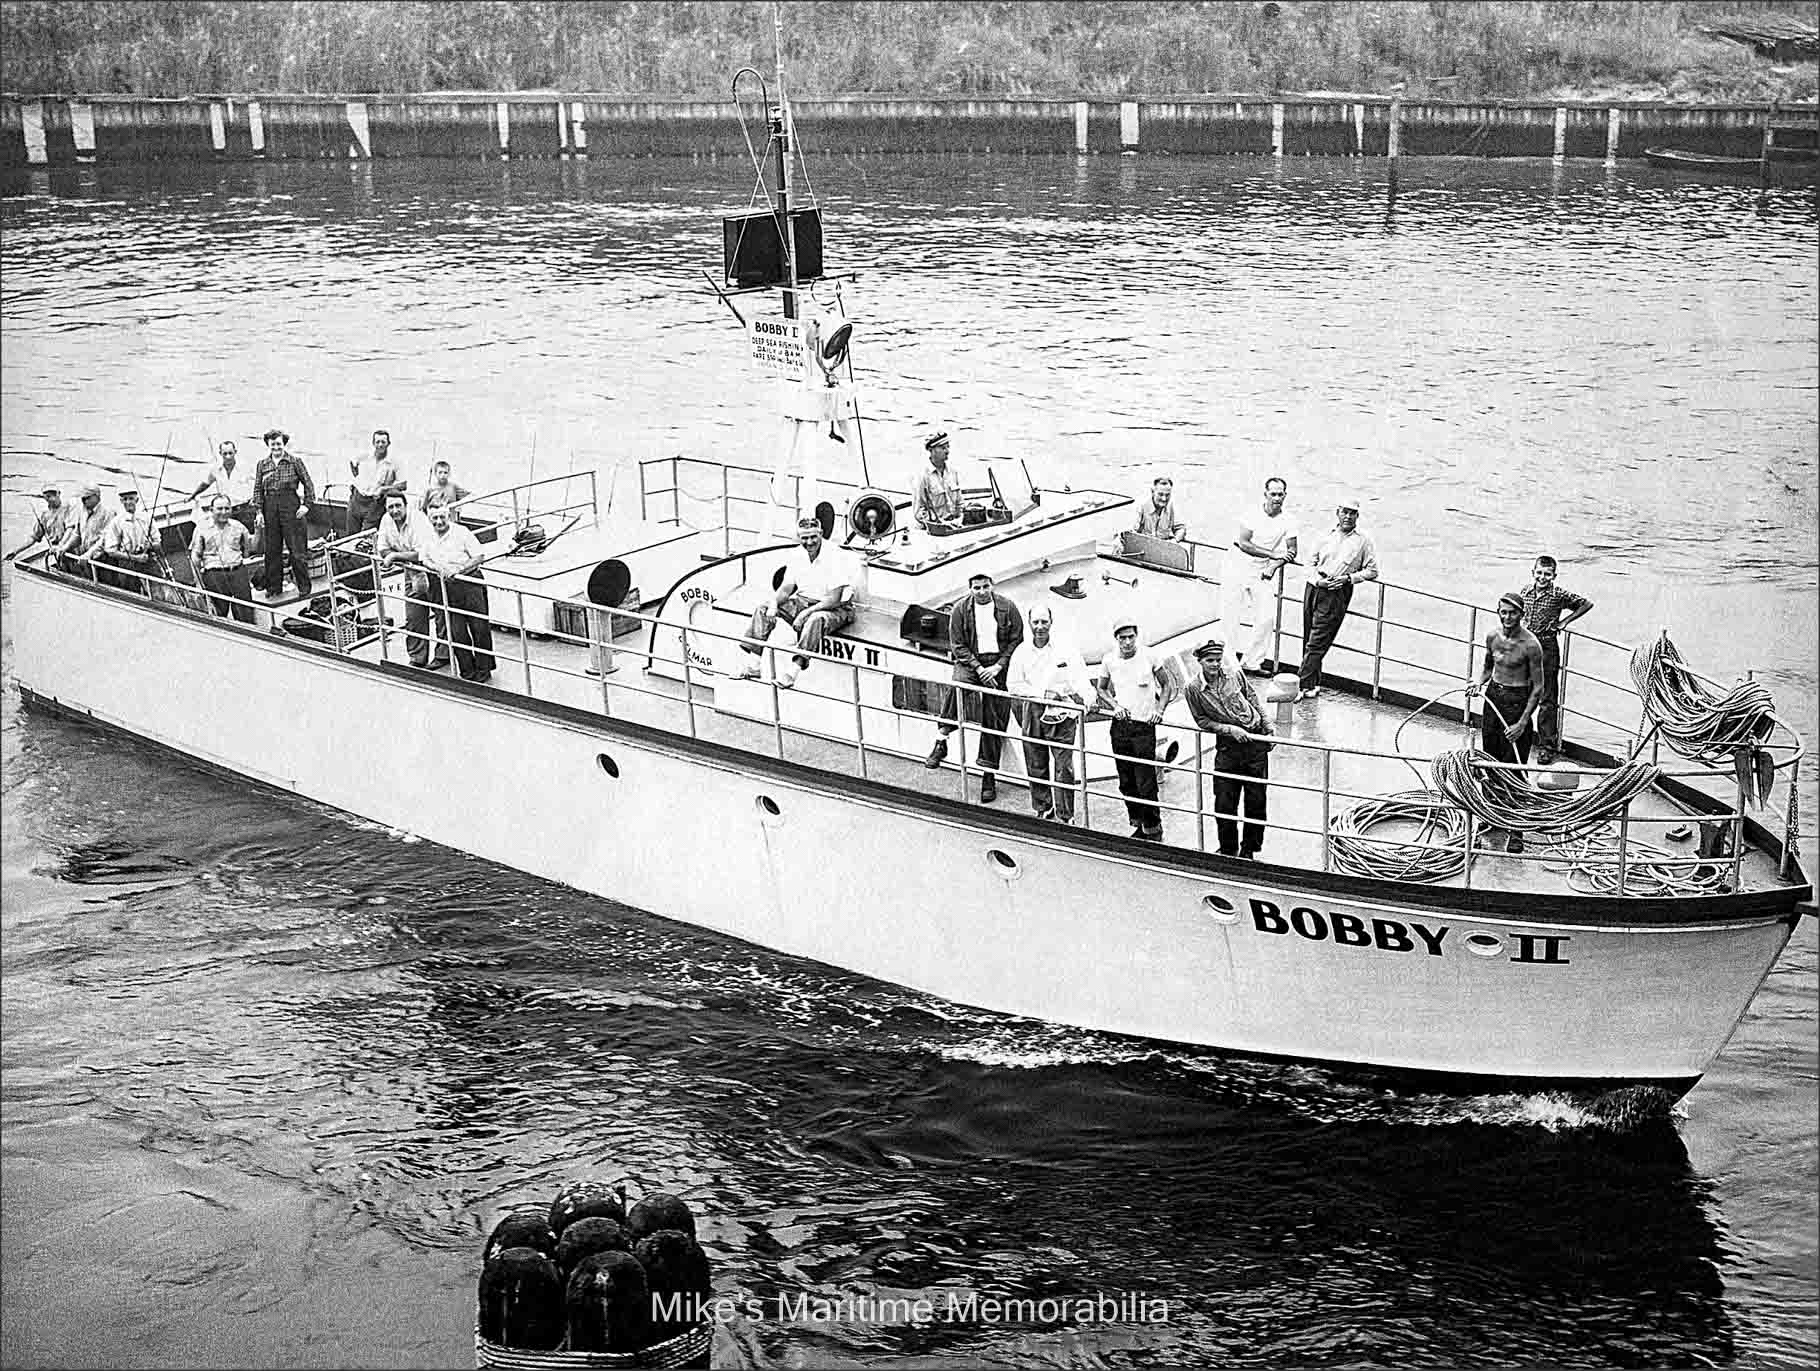 BOBBY II, Belmar, NJ – 1949 This photo shows the "BOBBY II" shortly after she was converted to party boat fishing by Stowman Shipyard at Dorchester, NJ in July 1949.